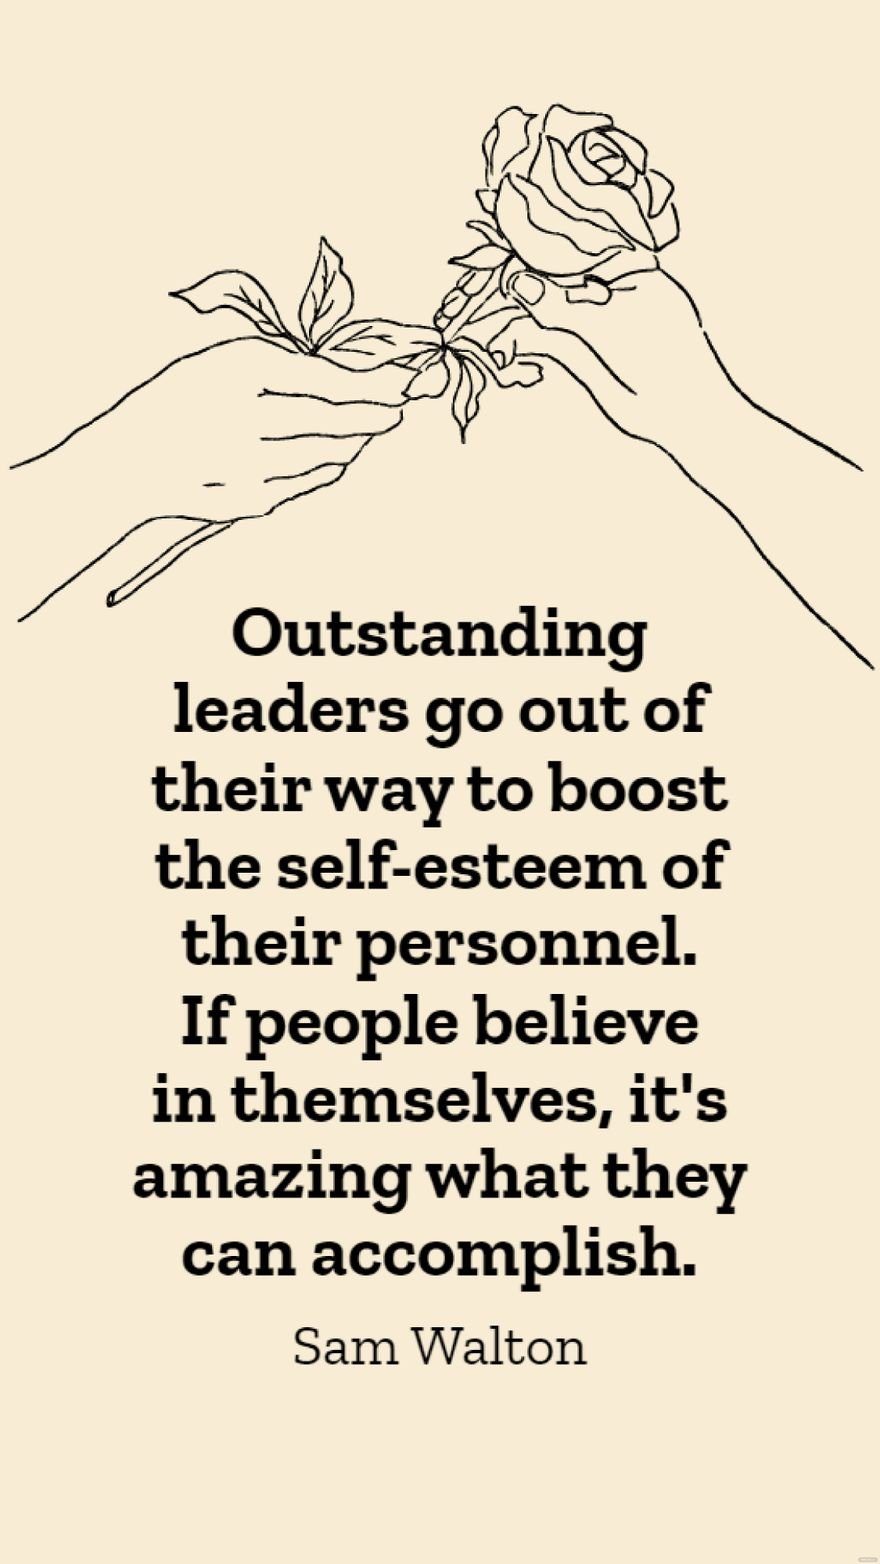 Sam Walton - Outstanding leaders go out of their way to boost the self-esteem of their personnel. If people believe in themselves, it's amazing what they can accomplish.